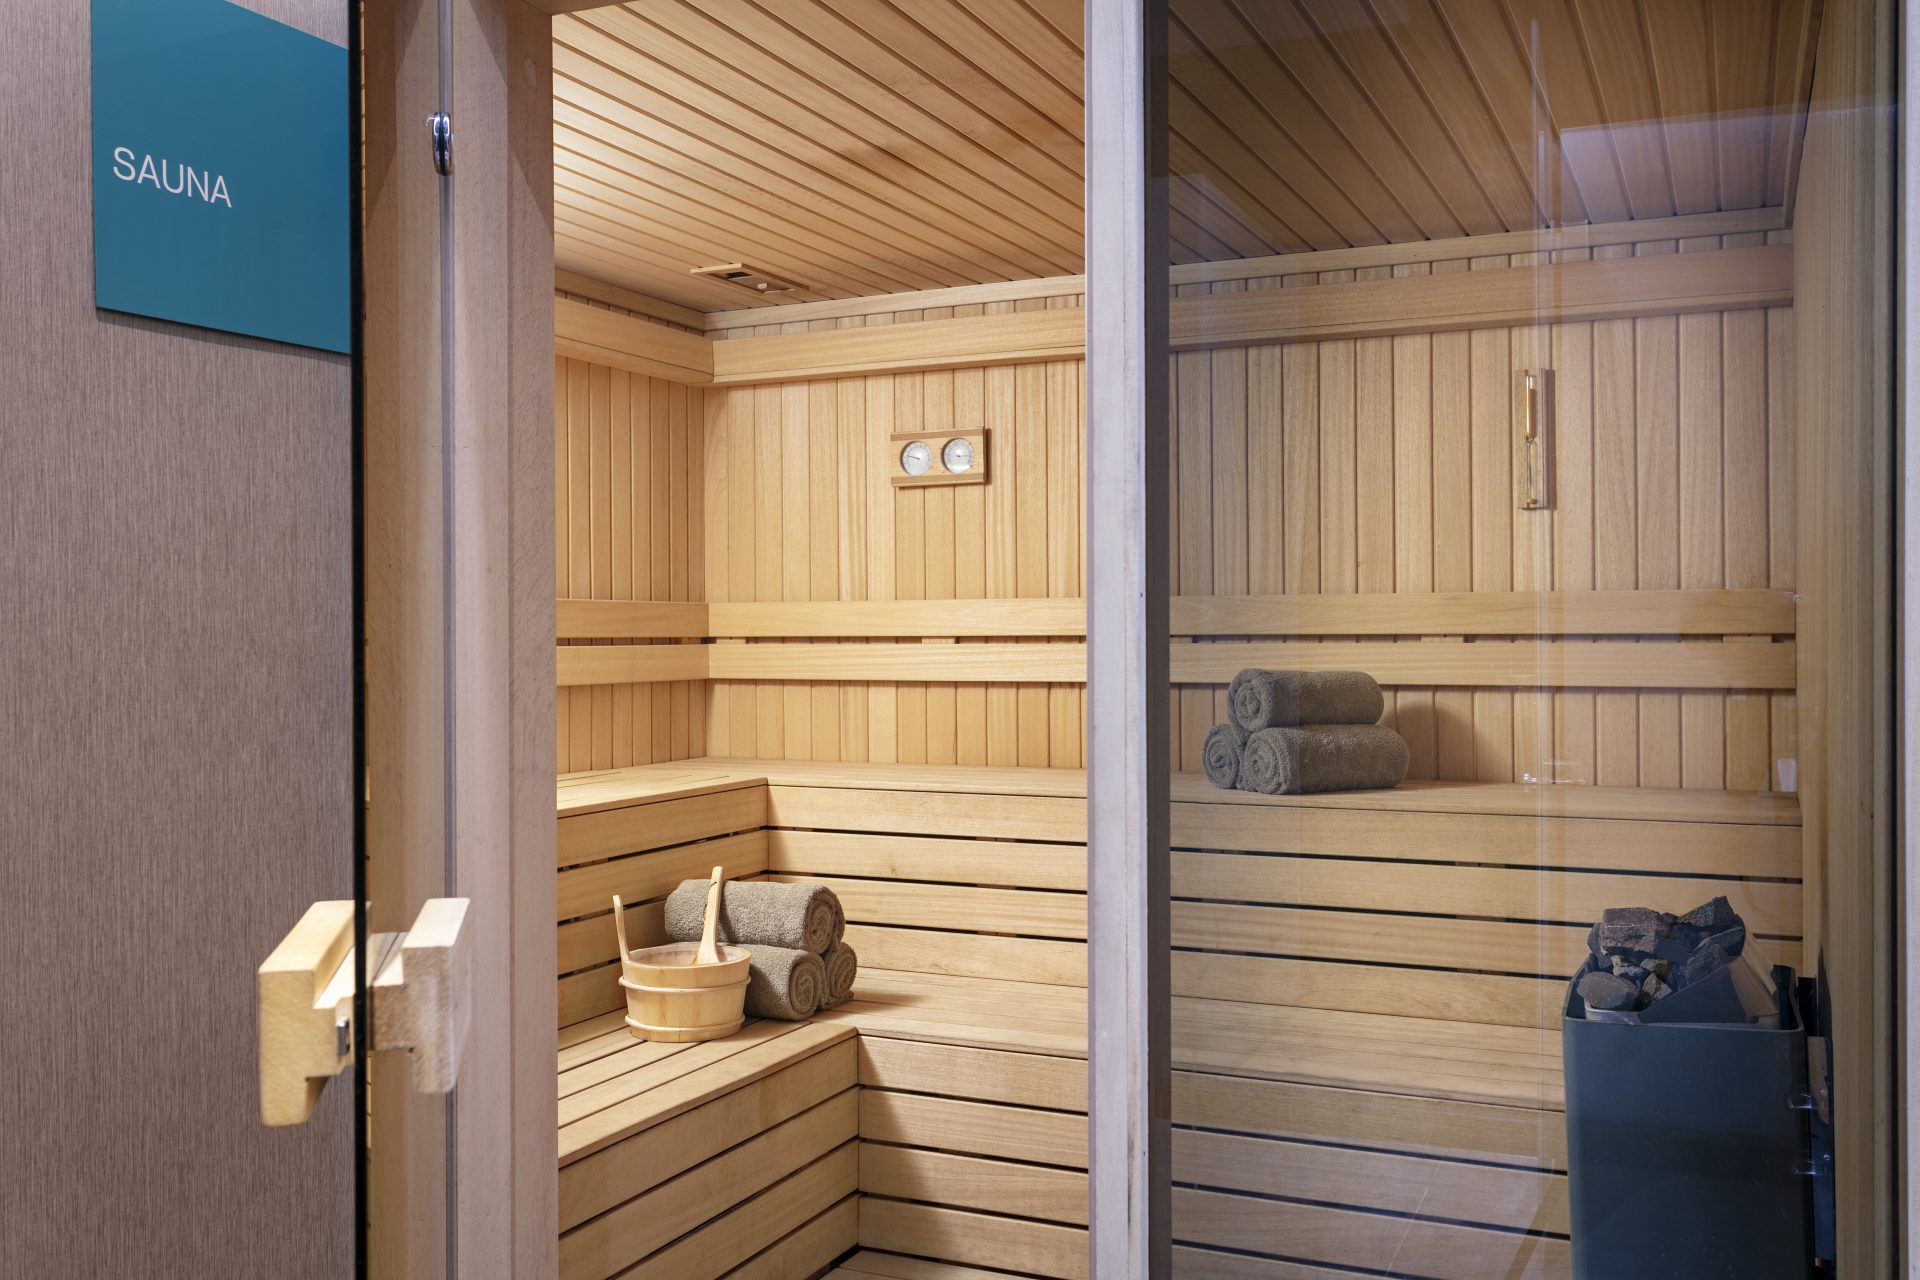 <p><span>Saunas are great for your cardiovascular system and they’re particularly helpful after exercise according to new research from a doctoral researcher at the University of Jyväskylä.</span></p>